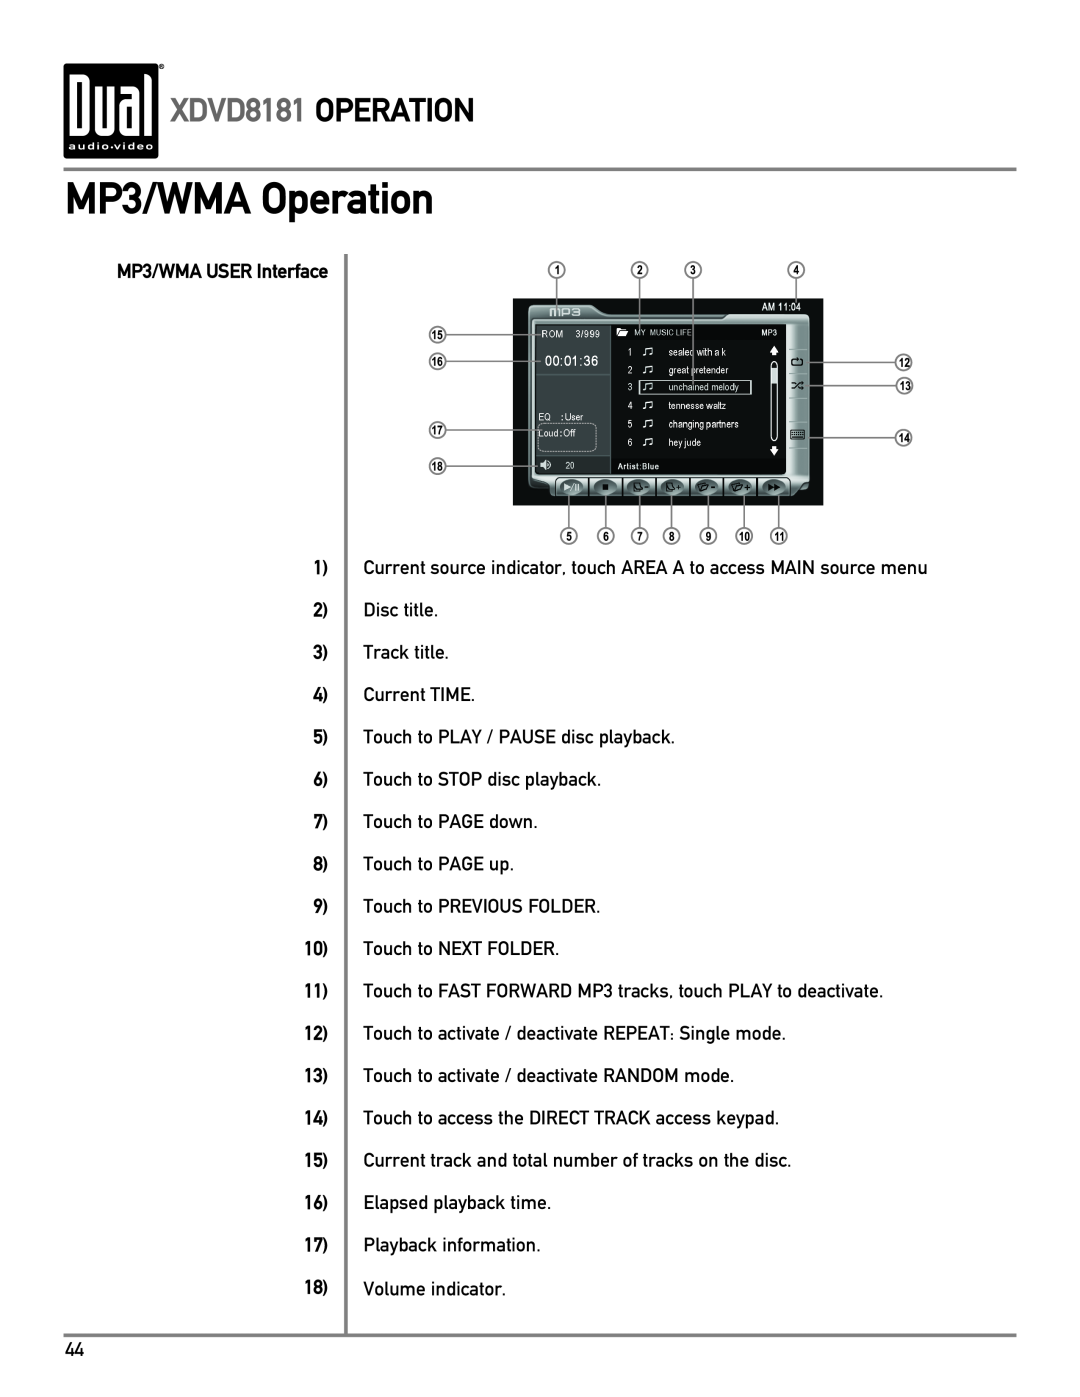 Dual owner manual MP3/WMA Operation, XDVD8181 OPERATION, MP3/WMA USER Interface 1 2 3 4 5 6 7 8 